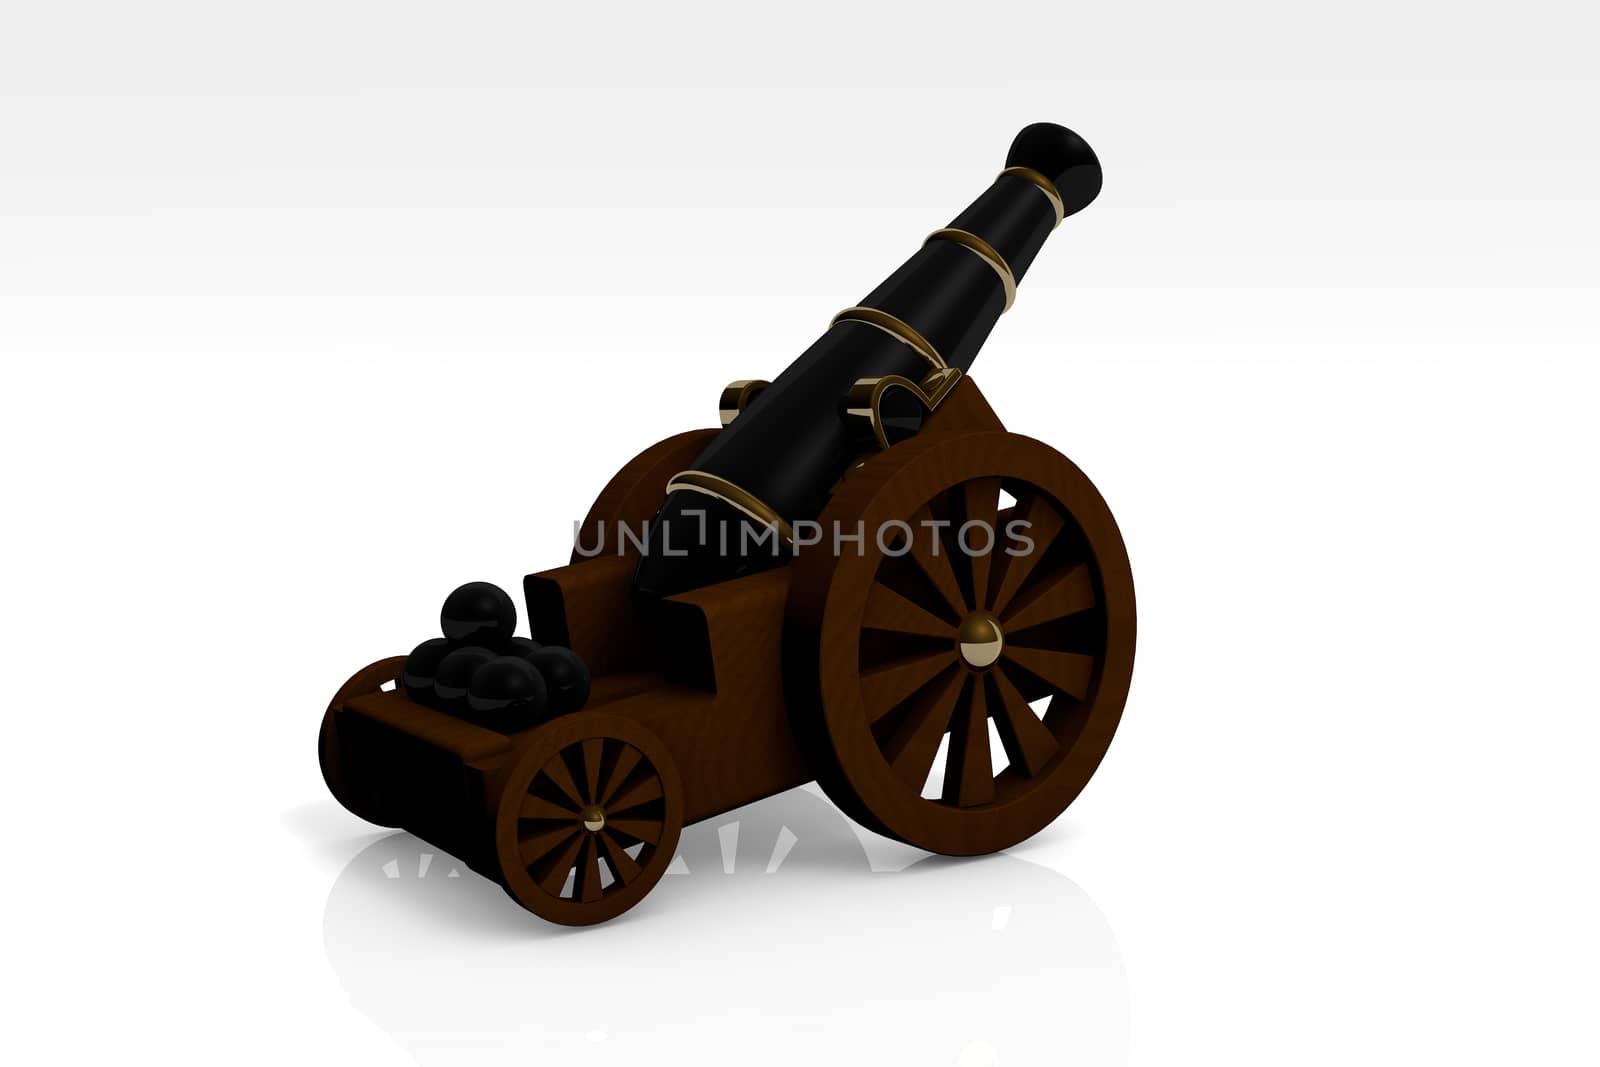 Medieval artillery gun on a wooden carriage isolated on white background